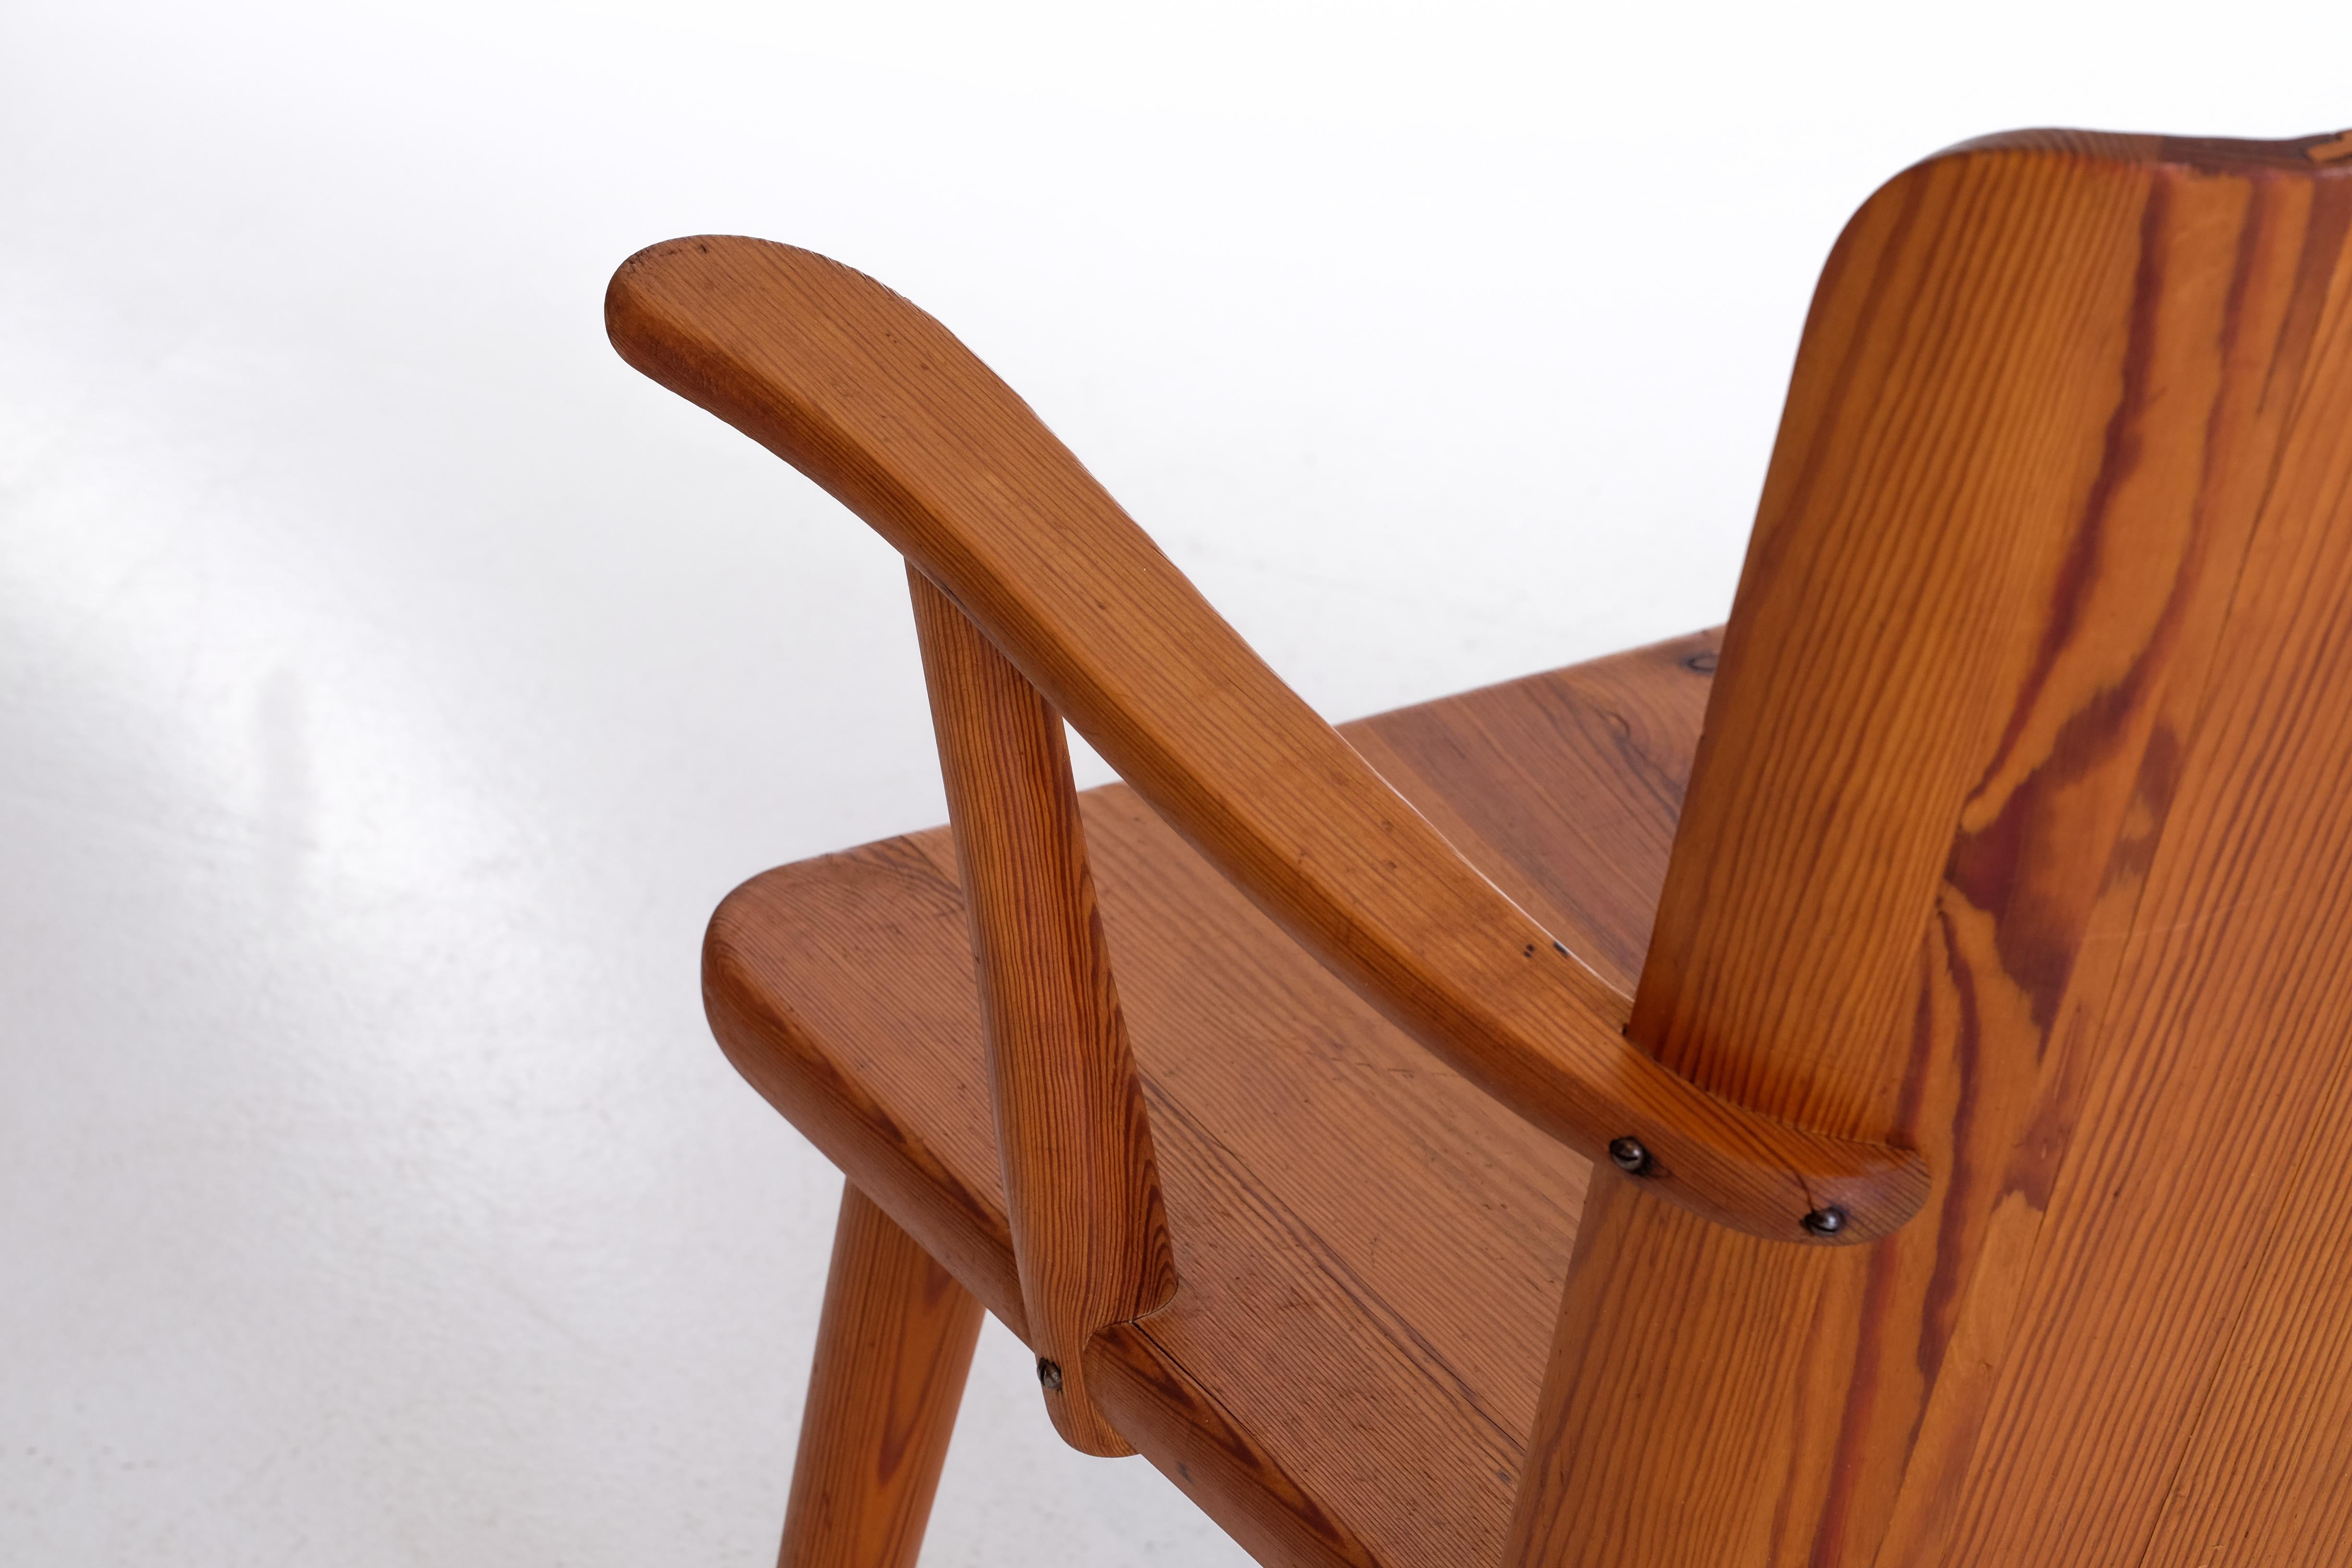 Pair of Swedish Pine Chairs by Göran Malmvall, 1950s For Sale 2